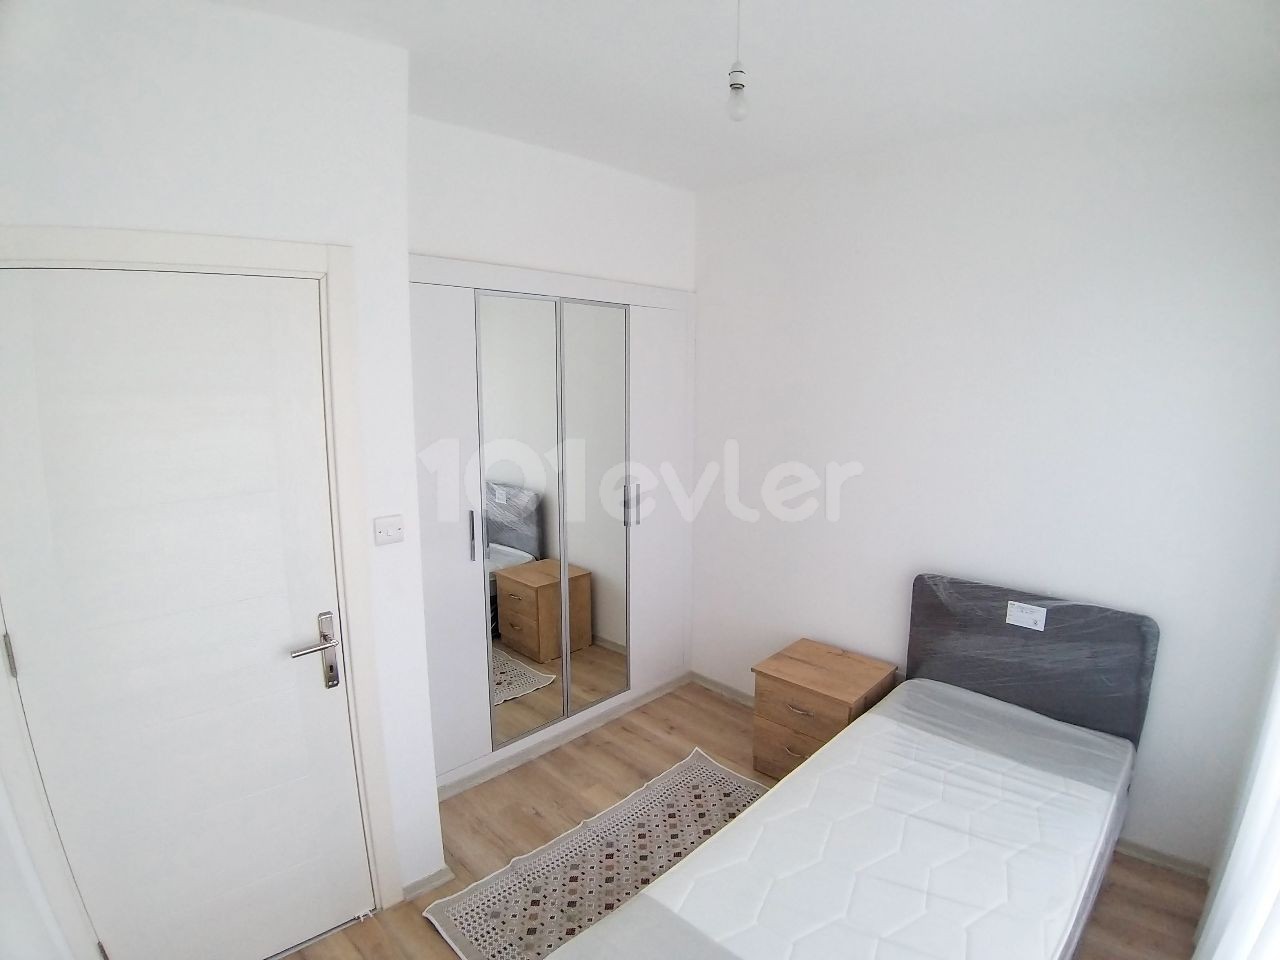 2+1 Flat for Rent in Alsancak, within walking distance to the main street and the sea